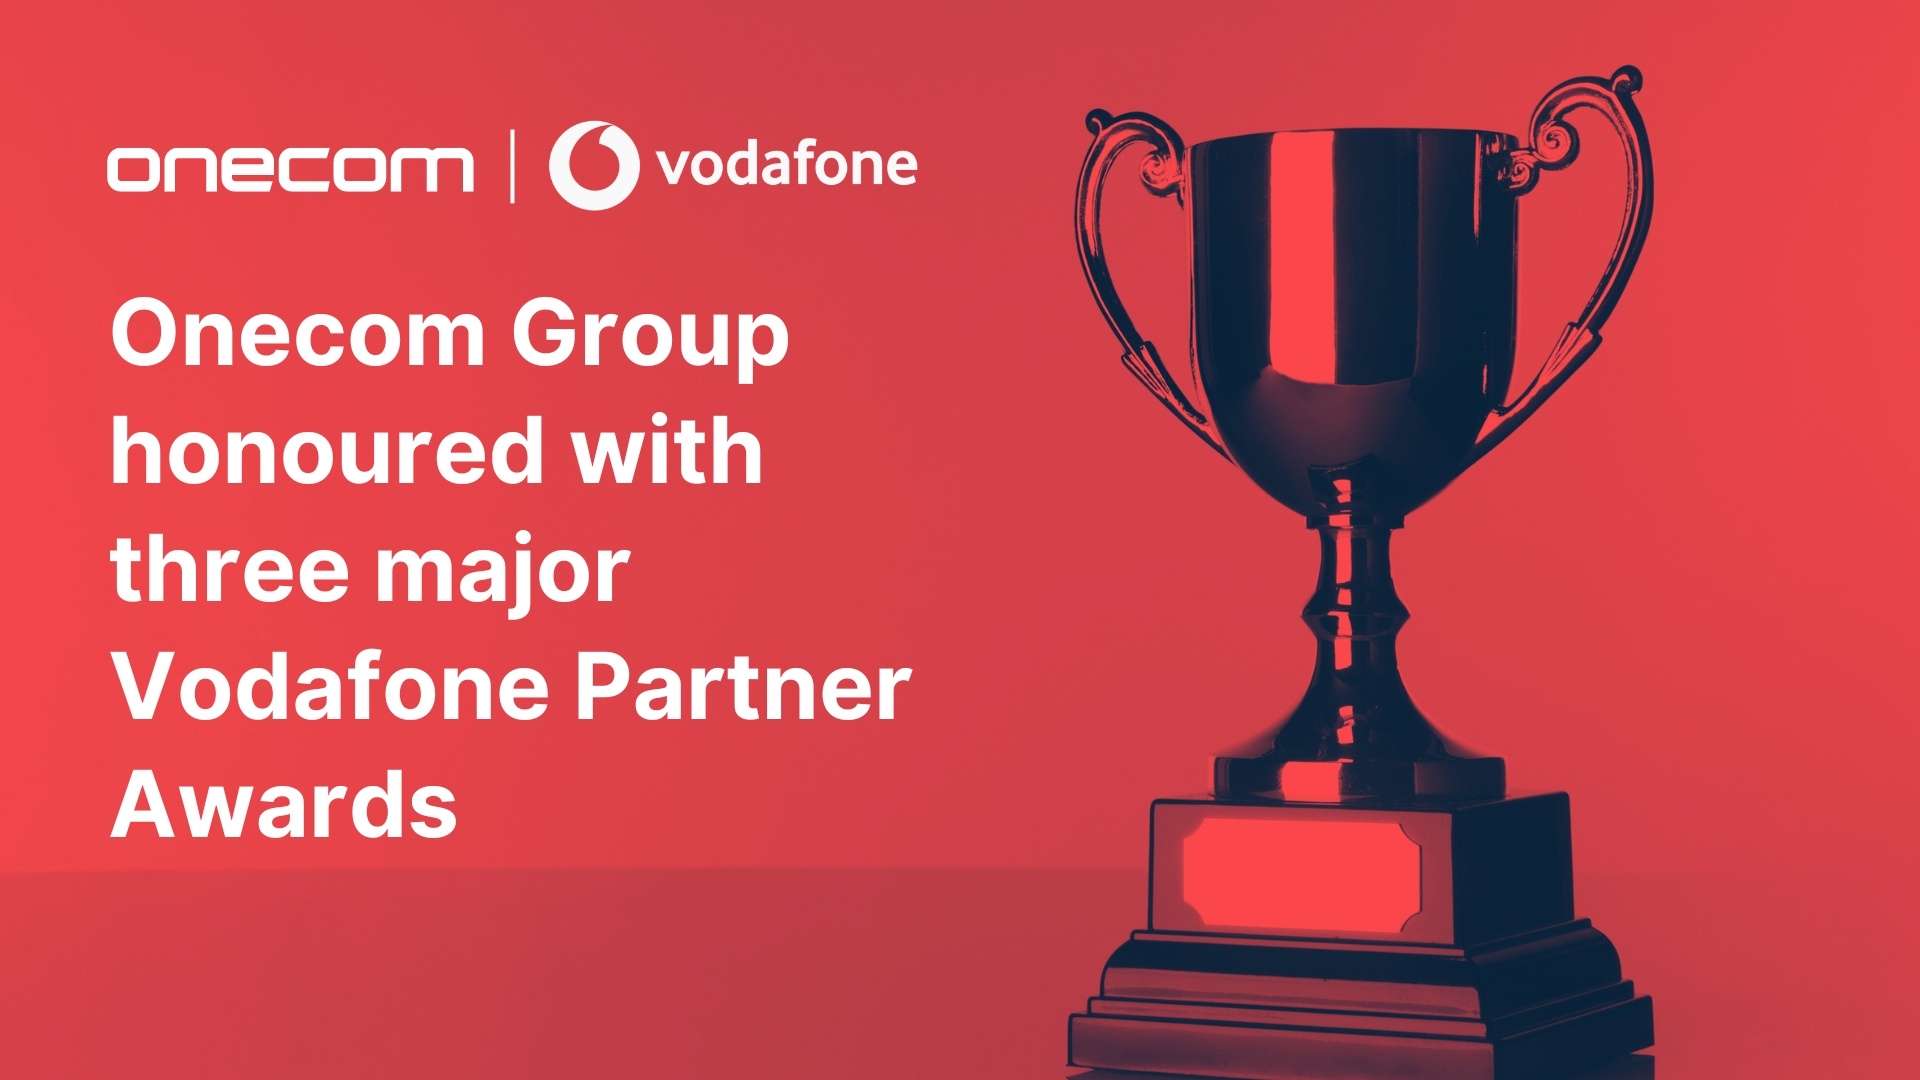 Onecom Group Wins Three Vodafone Partner Awards, Including Strategic Partner of the Year for the 14th Consecutive Year